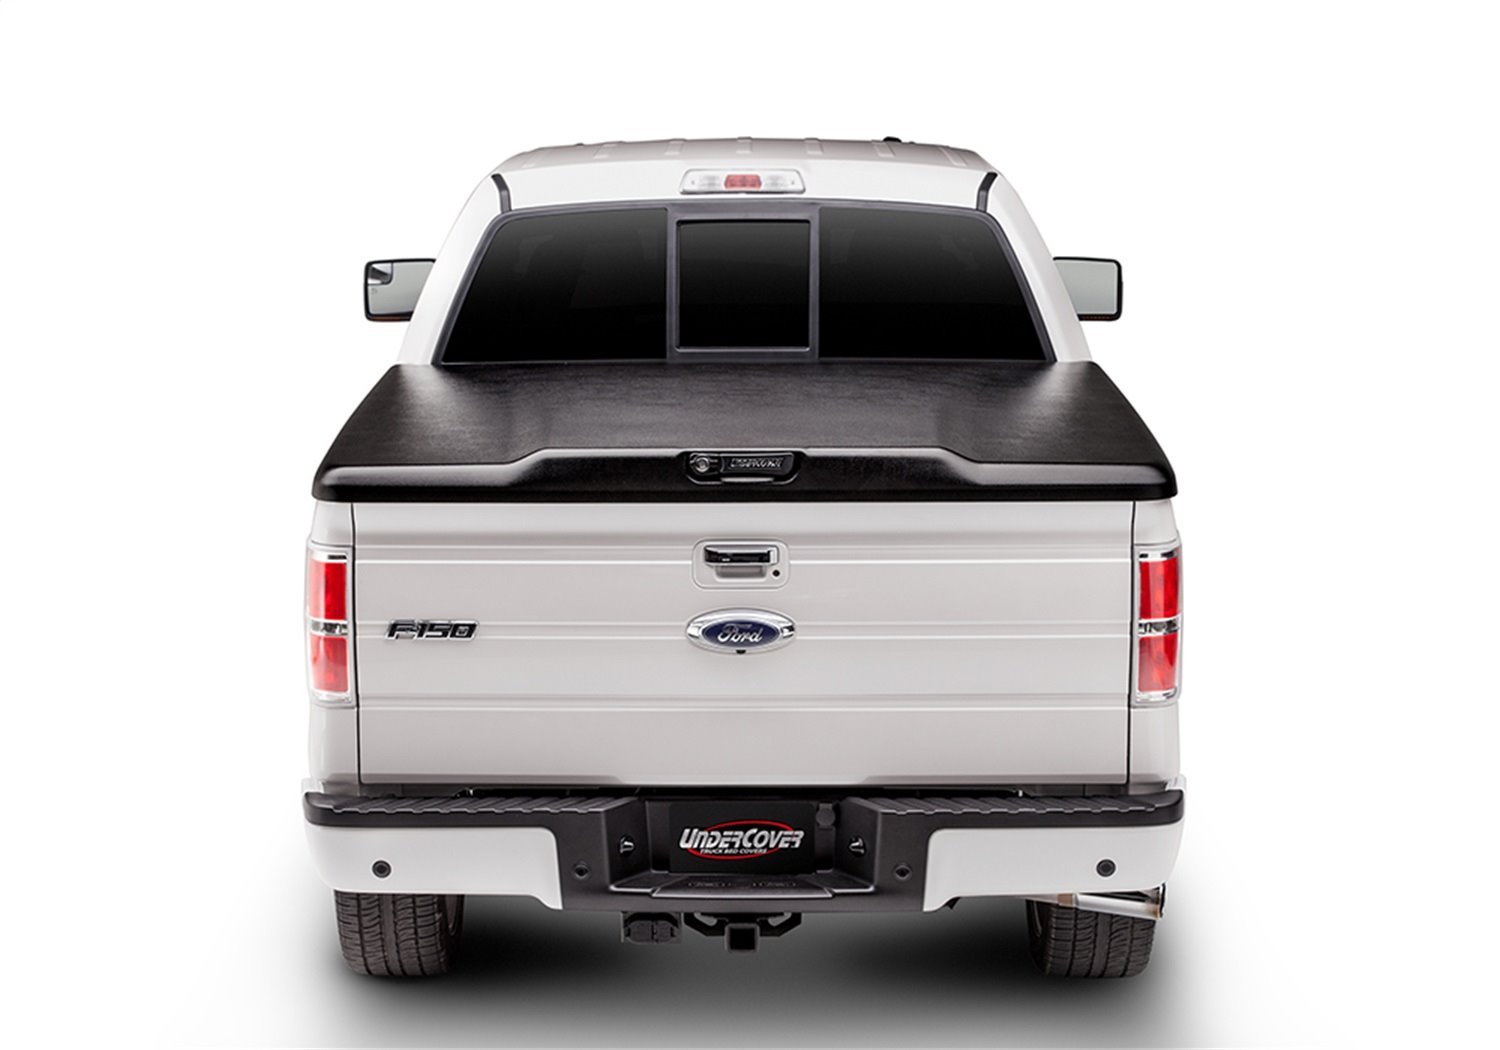 UC1208 Elite Hard Non-Folding Cover, Fits Select GMC Sierra 1500 6'7" Bed EXT/Crew w/o MultiPro Tailgate, Black Textured